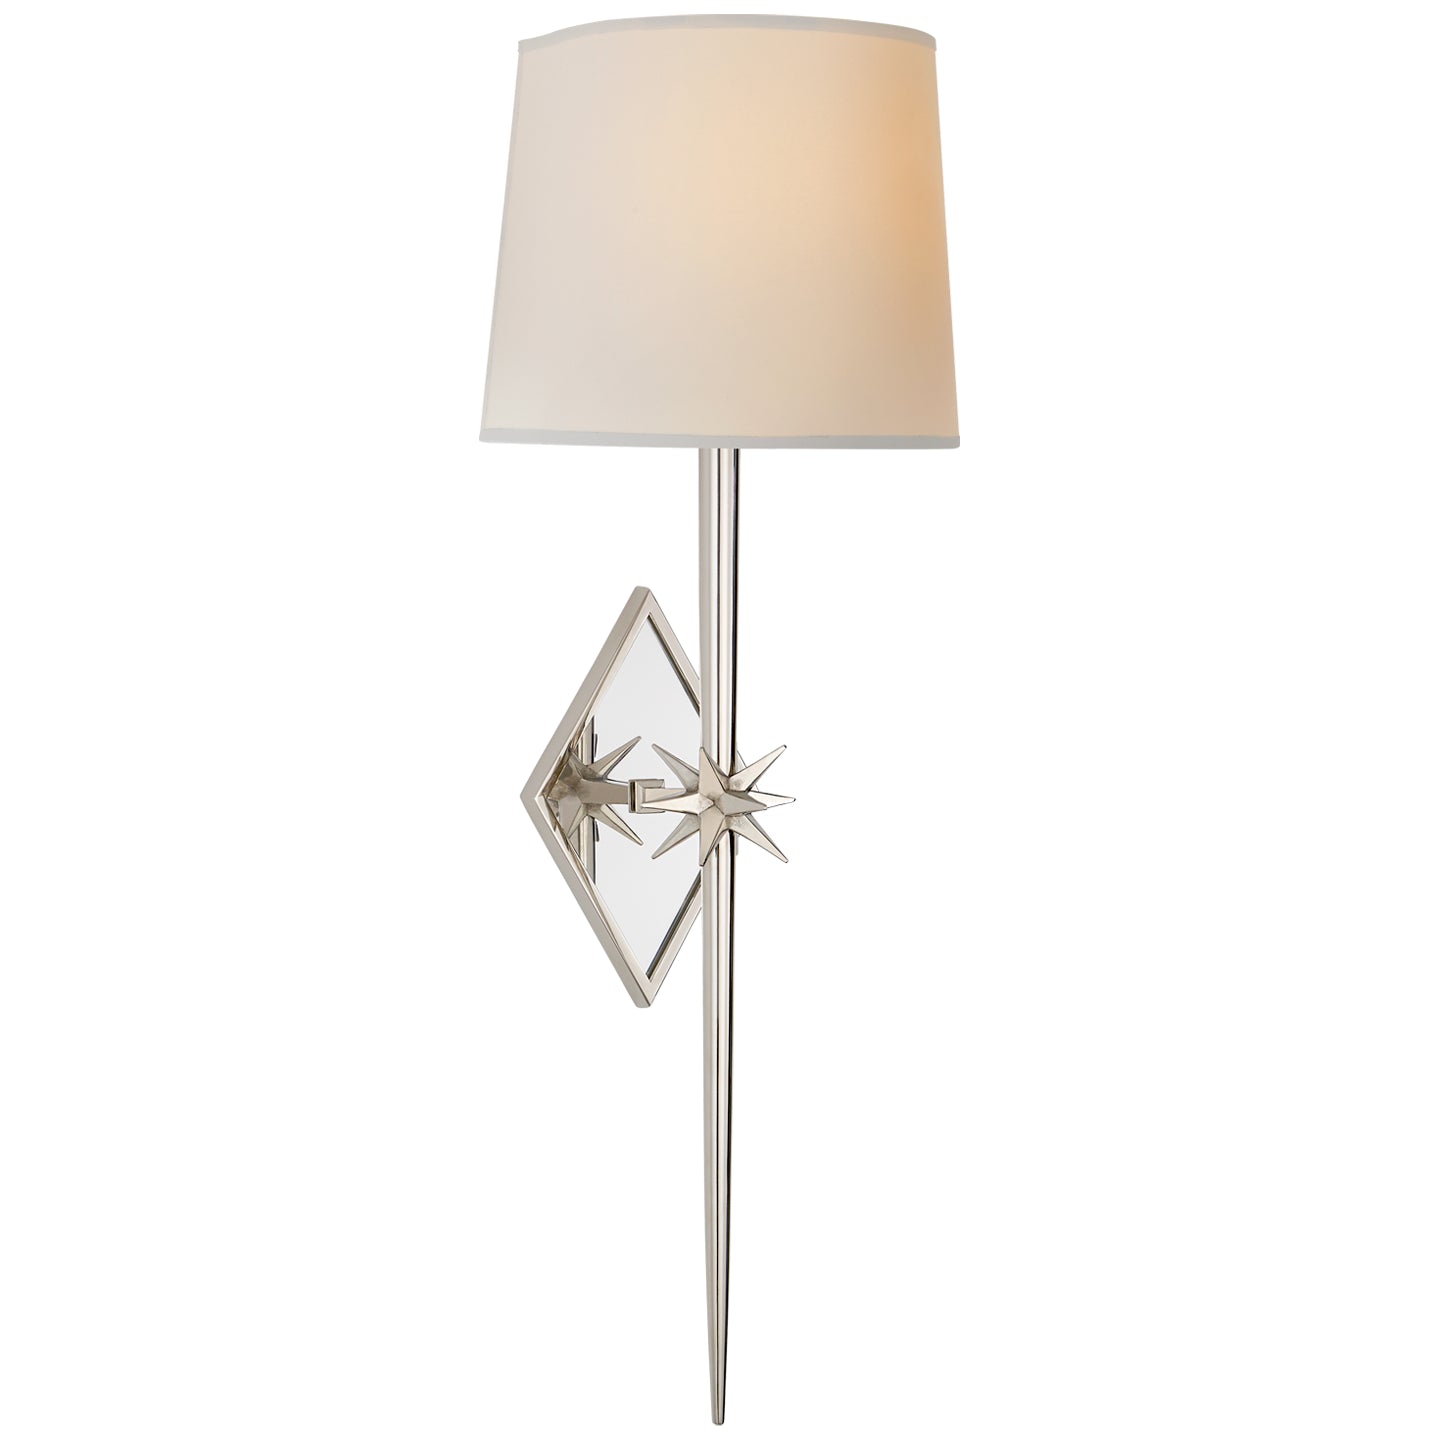 Visual Comfort Signature - S 2321PN-NP - Two Light Wall Sconce - Etoile - Polished Nickel